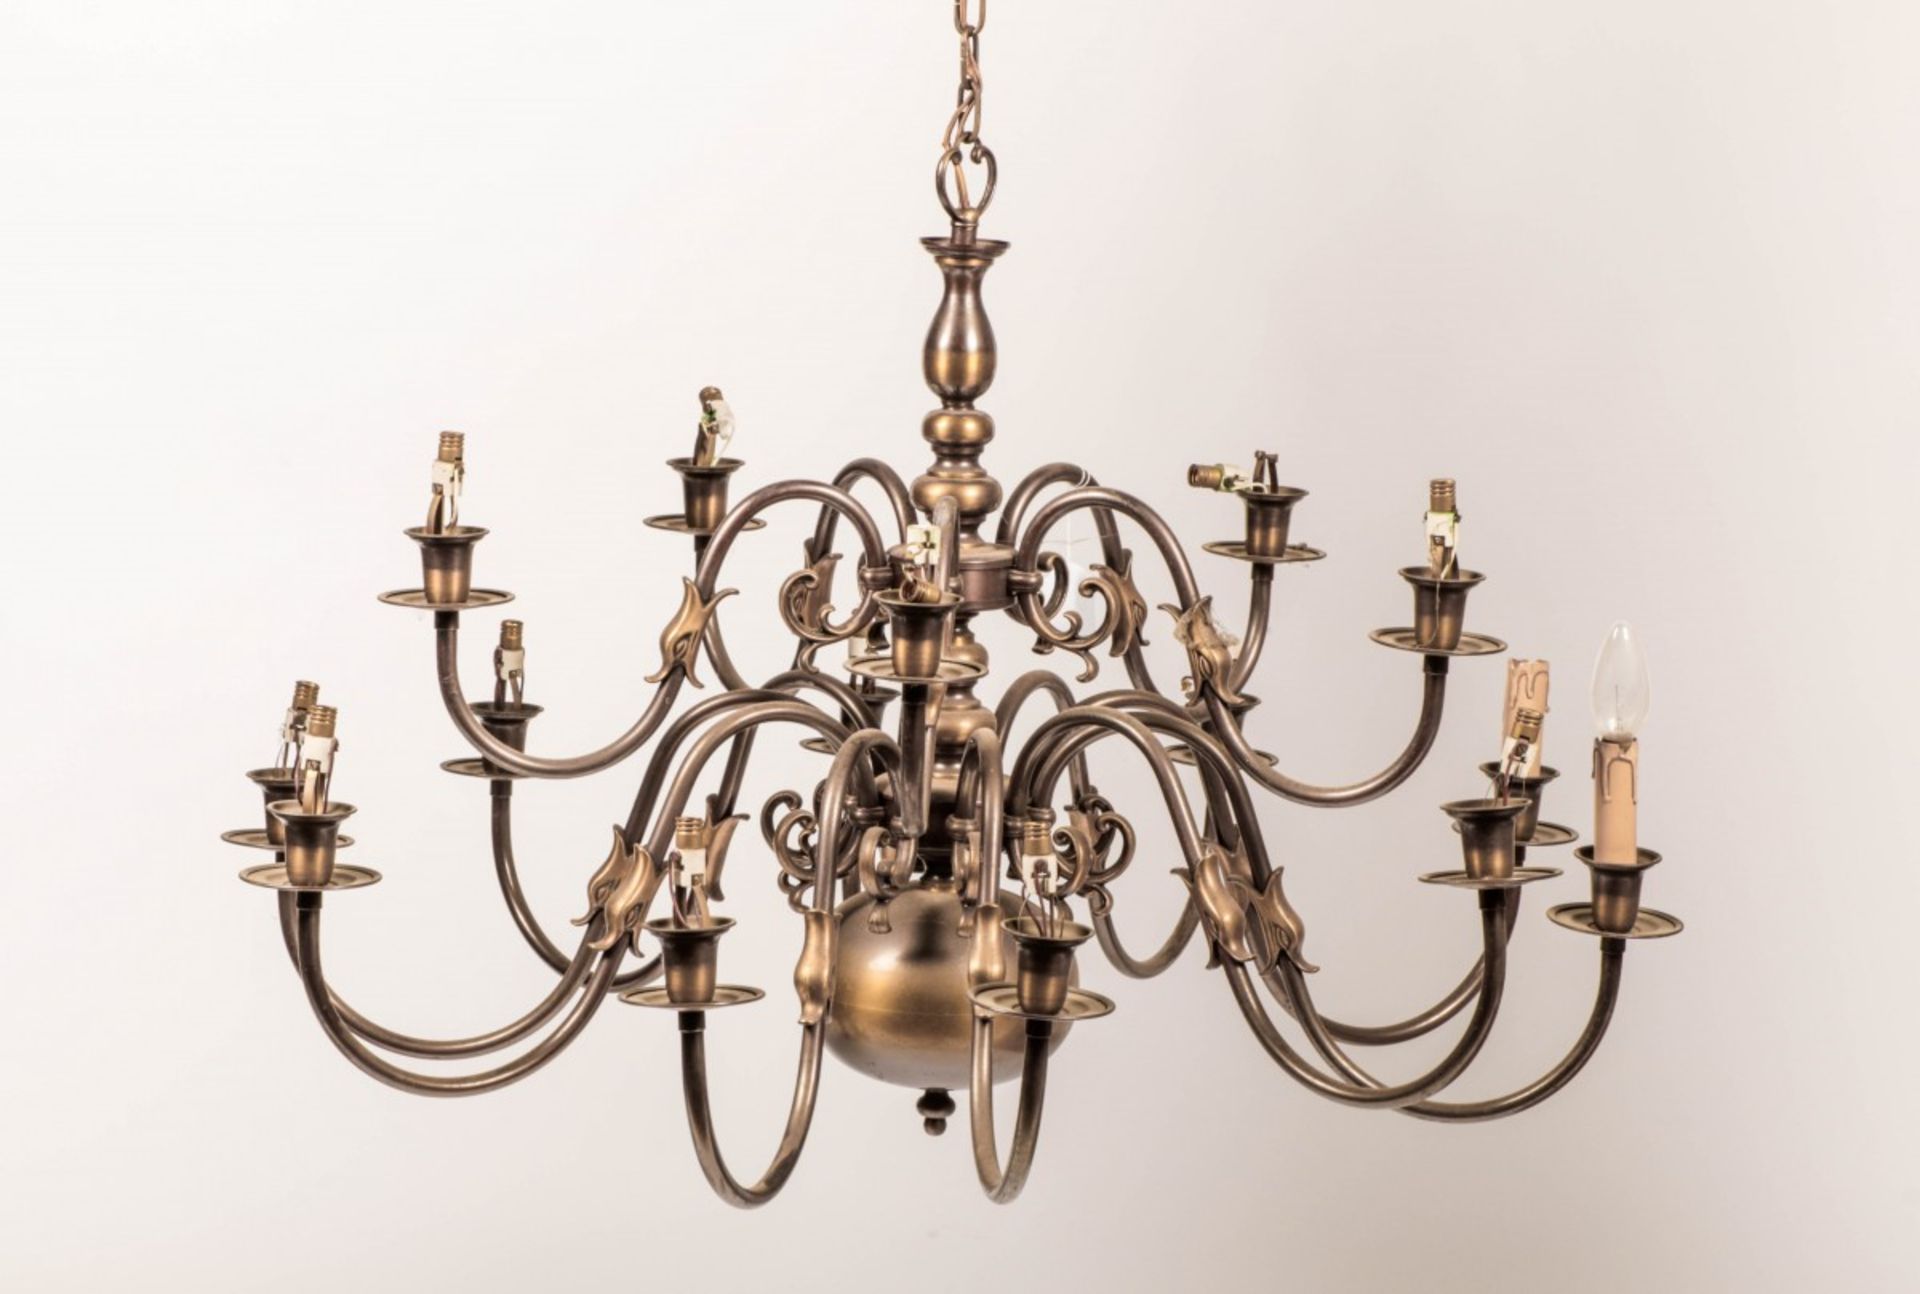 A set of (2) identical bronzed brass chandeliers, Dutch, 2nd half 20th century. - Image 2 of 2